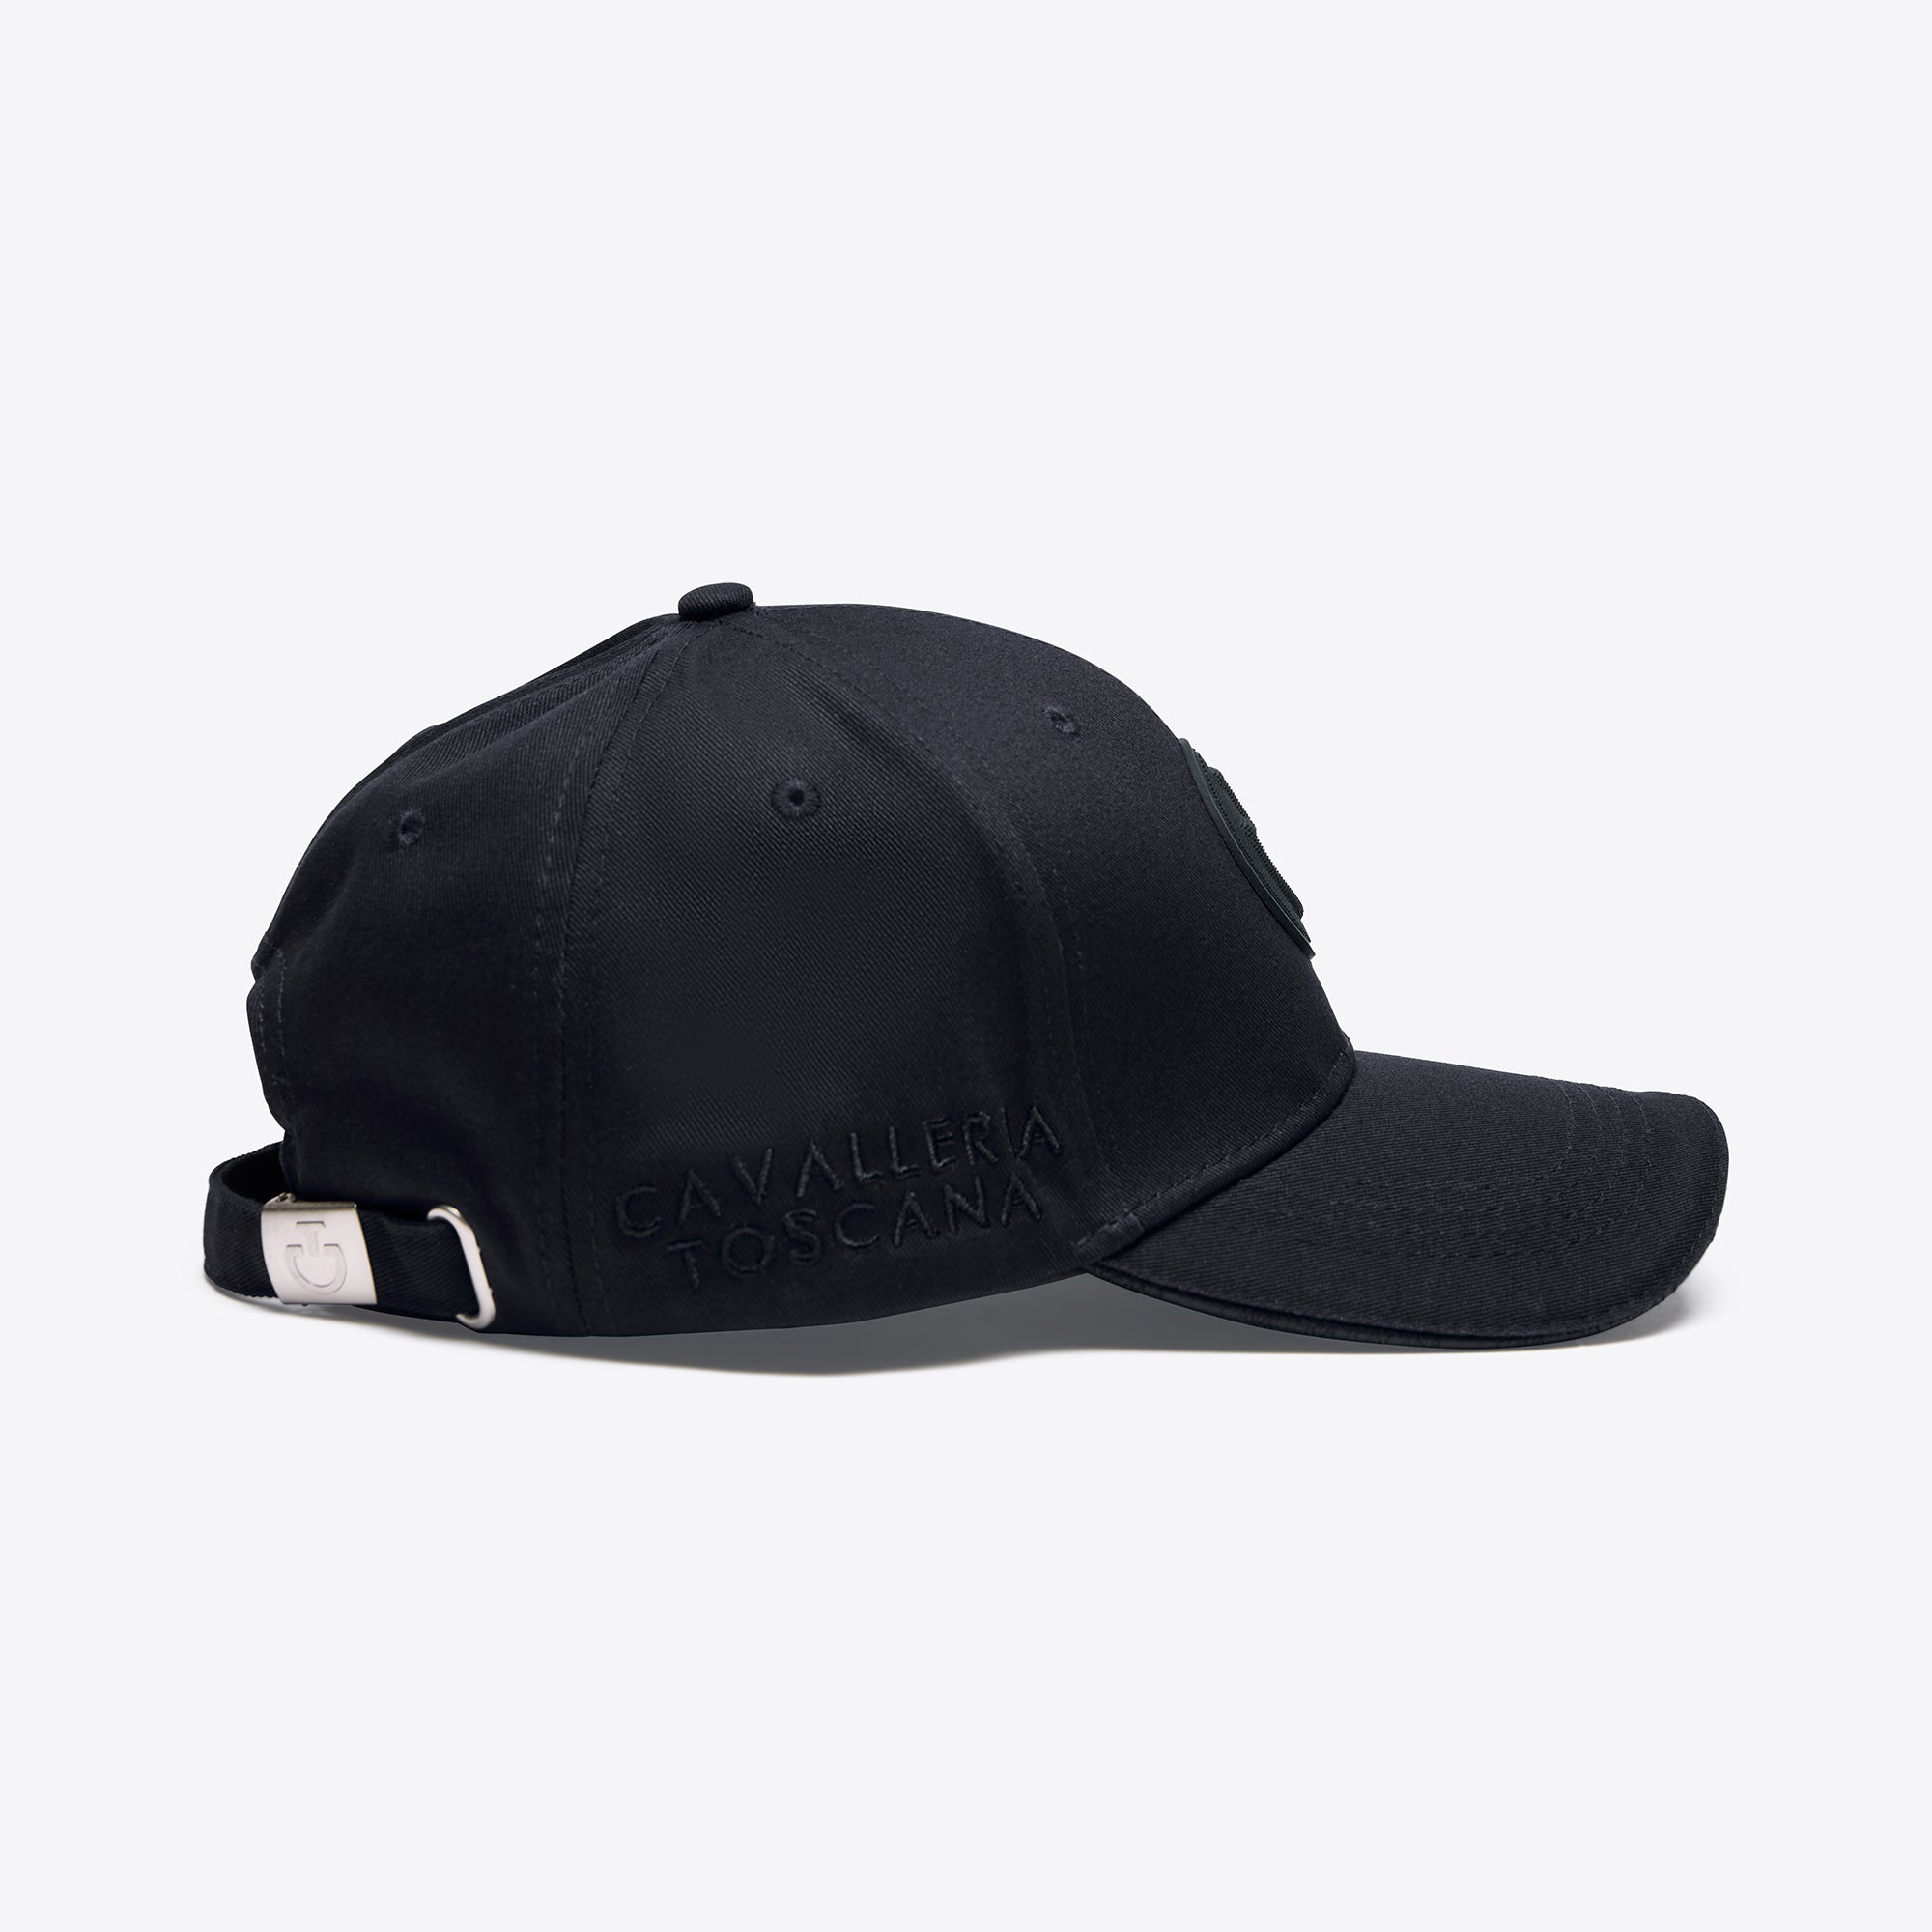 CT Silicone Patch Baseball Cap - Black